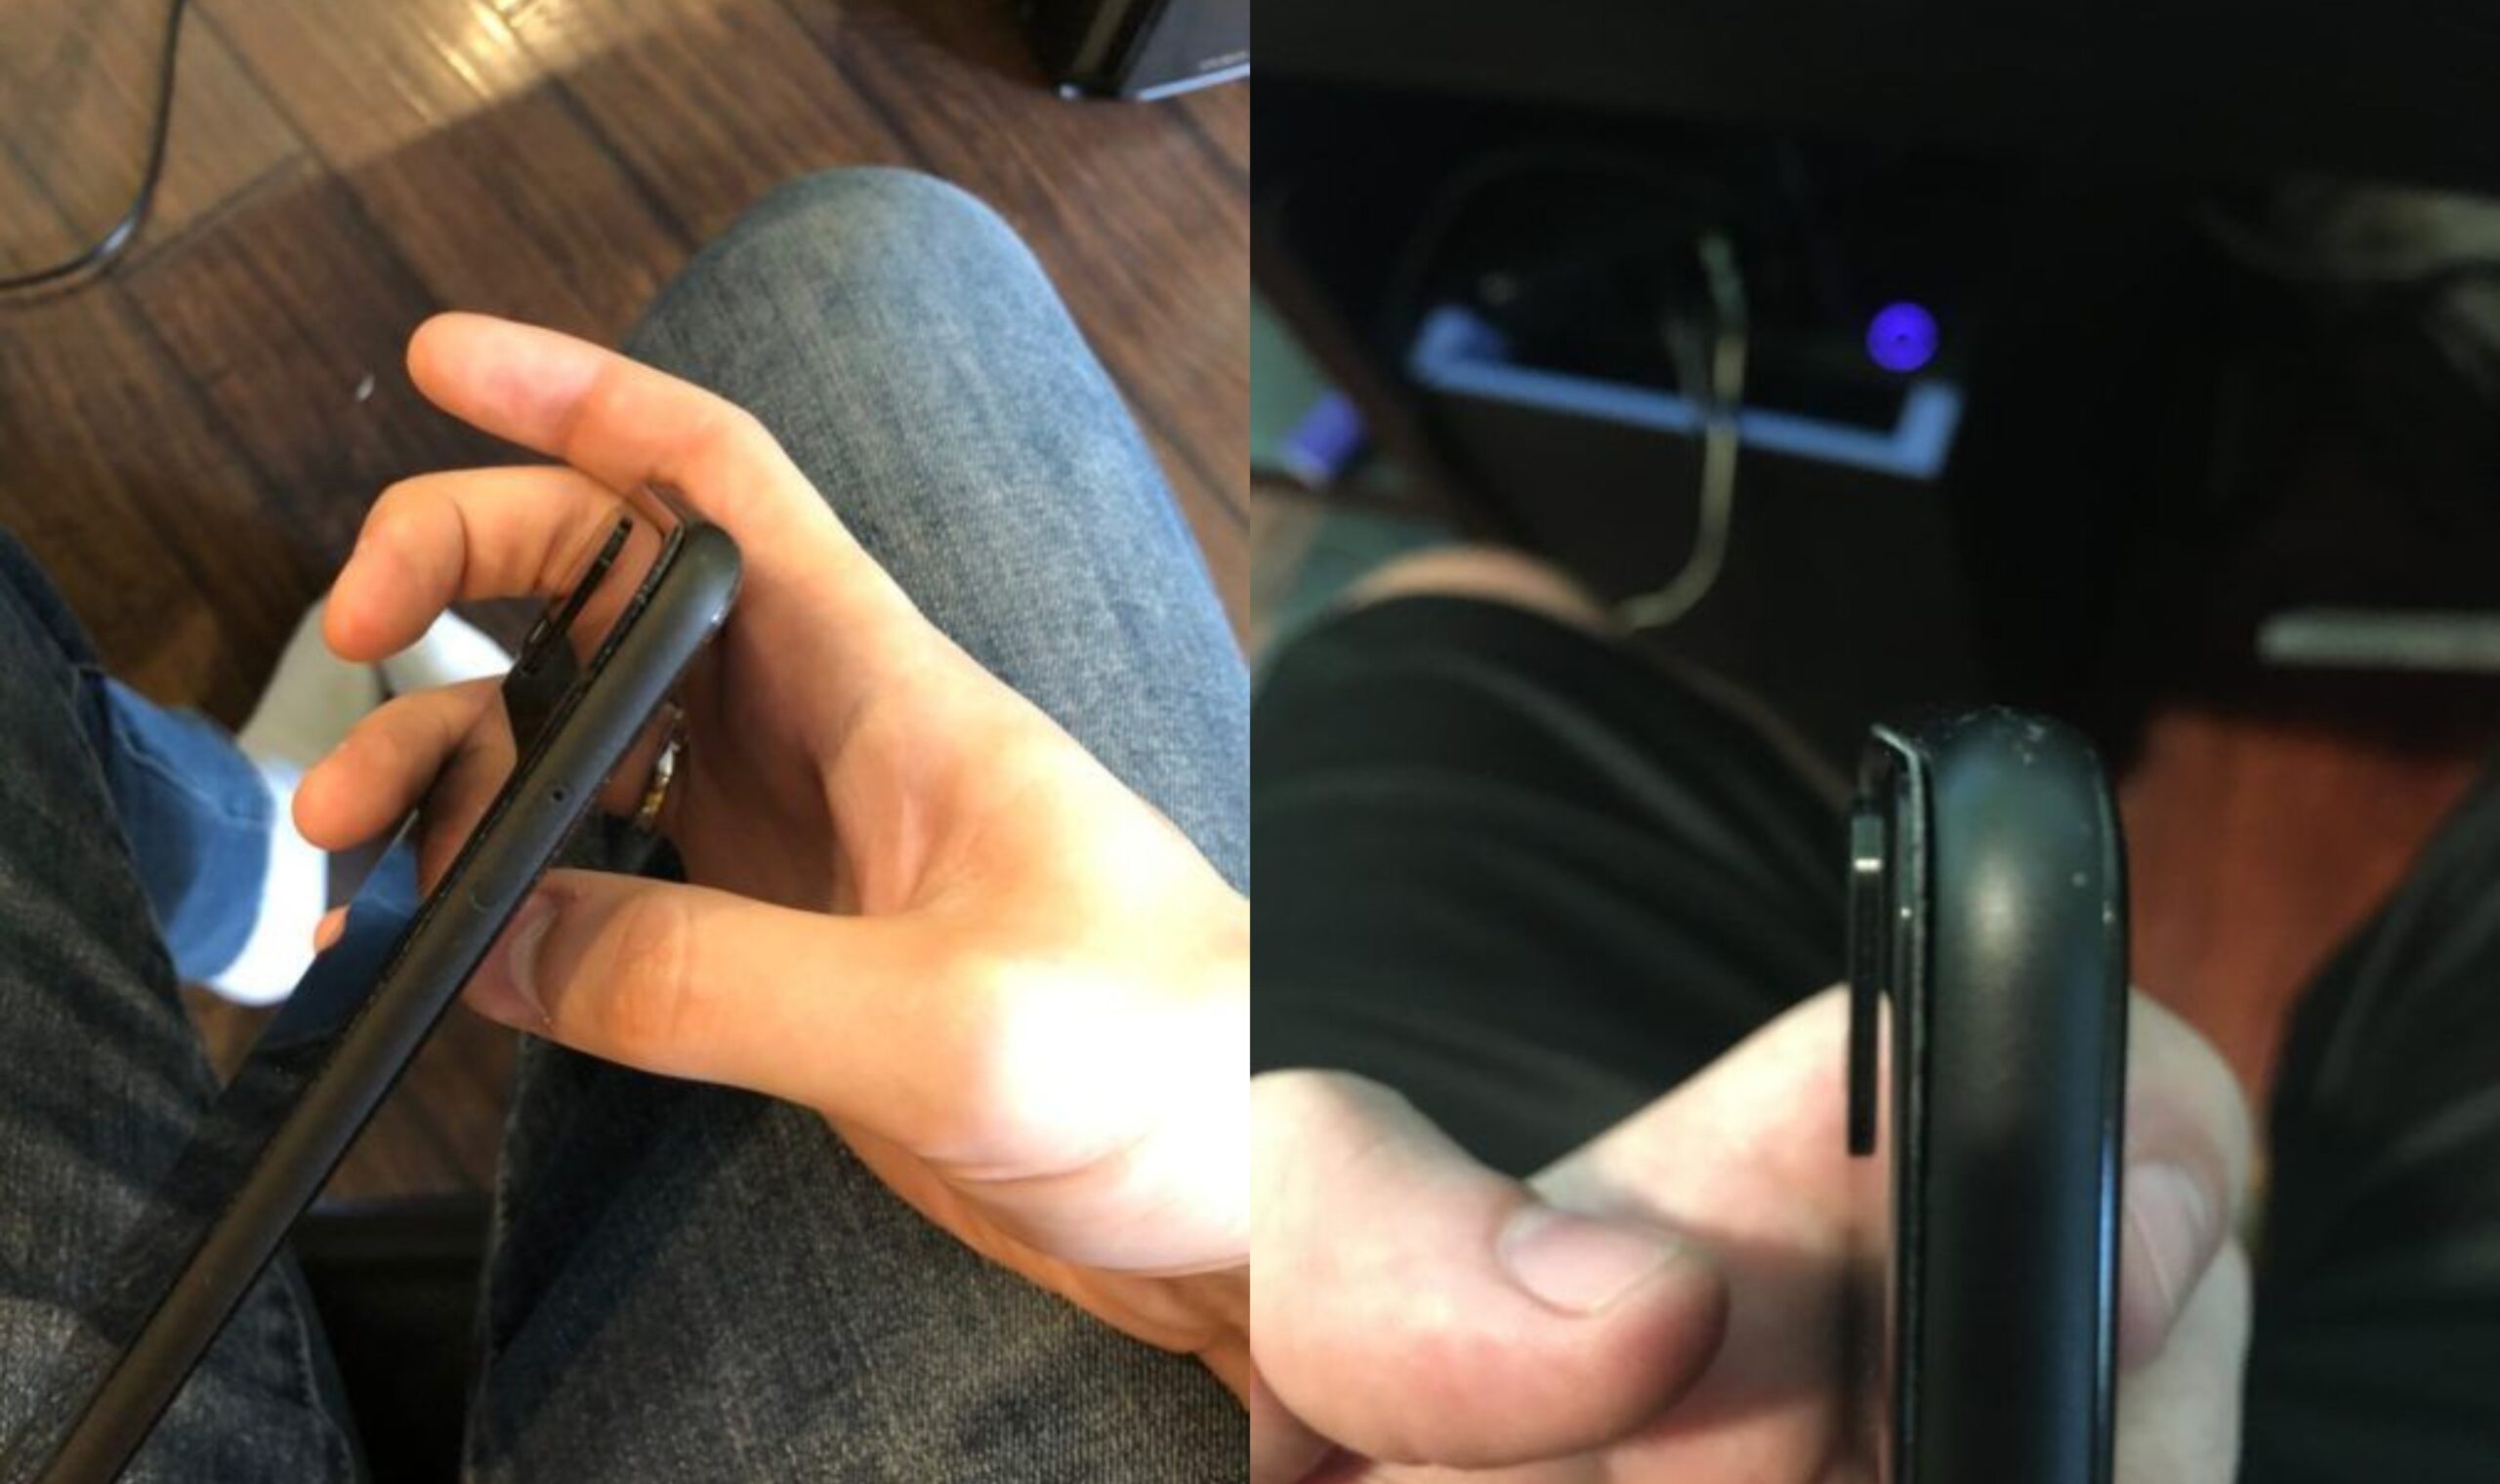 Pixel 4 XL users are reporting peeling off of rear glass panel